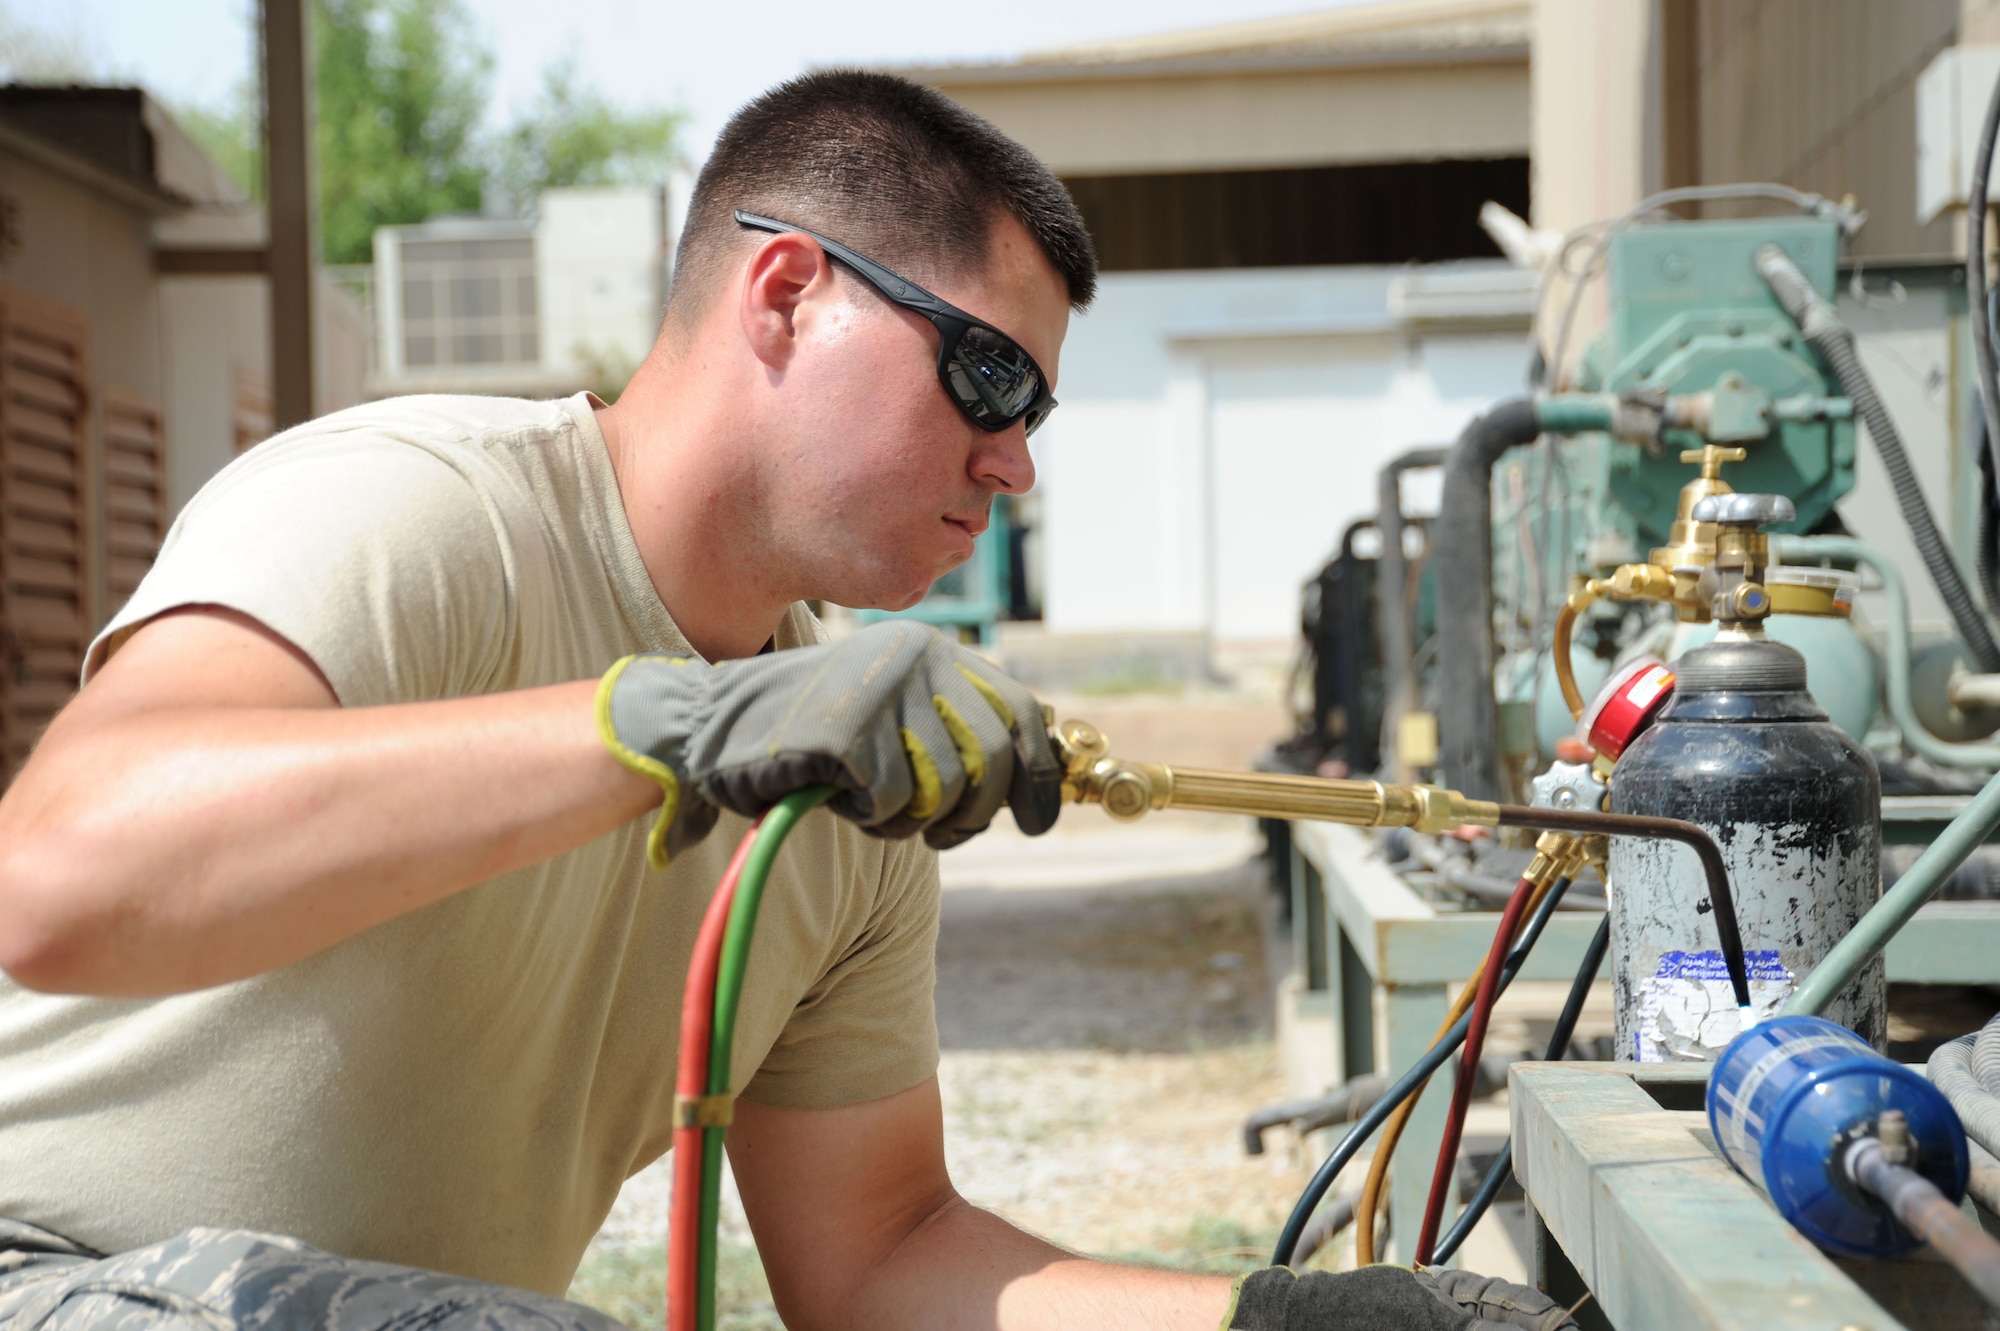 Senior Airman Kyle Cvoliga, 386th Expeditionary Civil Engineer Squadron heating, ventilation, and air conditioning technician, uses a blowtorch to fix a leak on an A/C unit Sep. 2, 2016, at an undisclosed location in Southwest Asia. The 386 ECES HVAC shop is responsible for fixing and maintaining over 725 A/C units across the base. (U.S. Air Force photo/Senior Airman Zachary Kee)